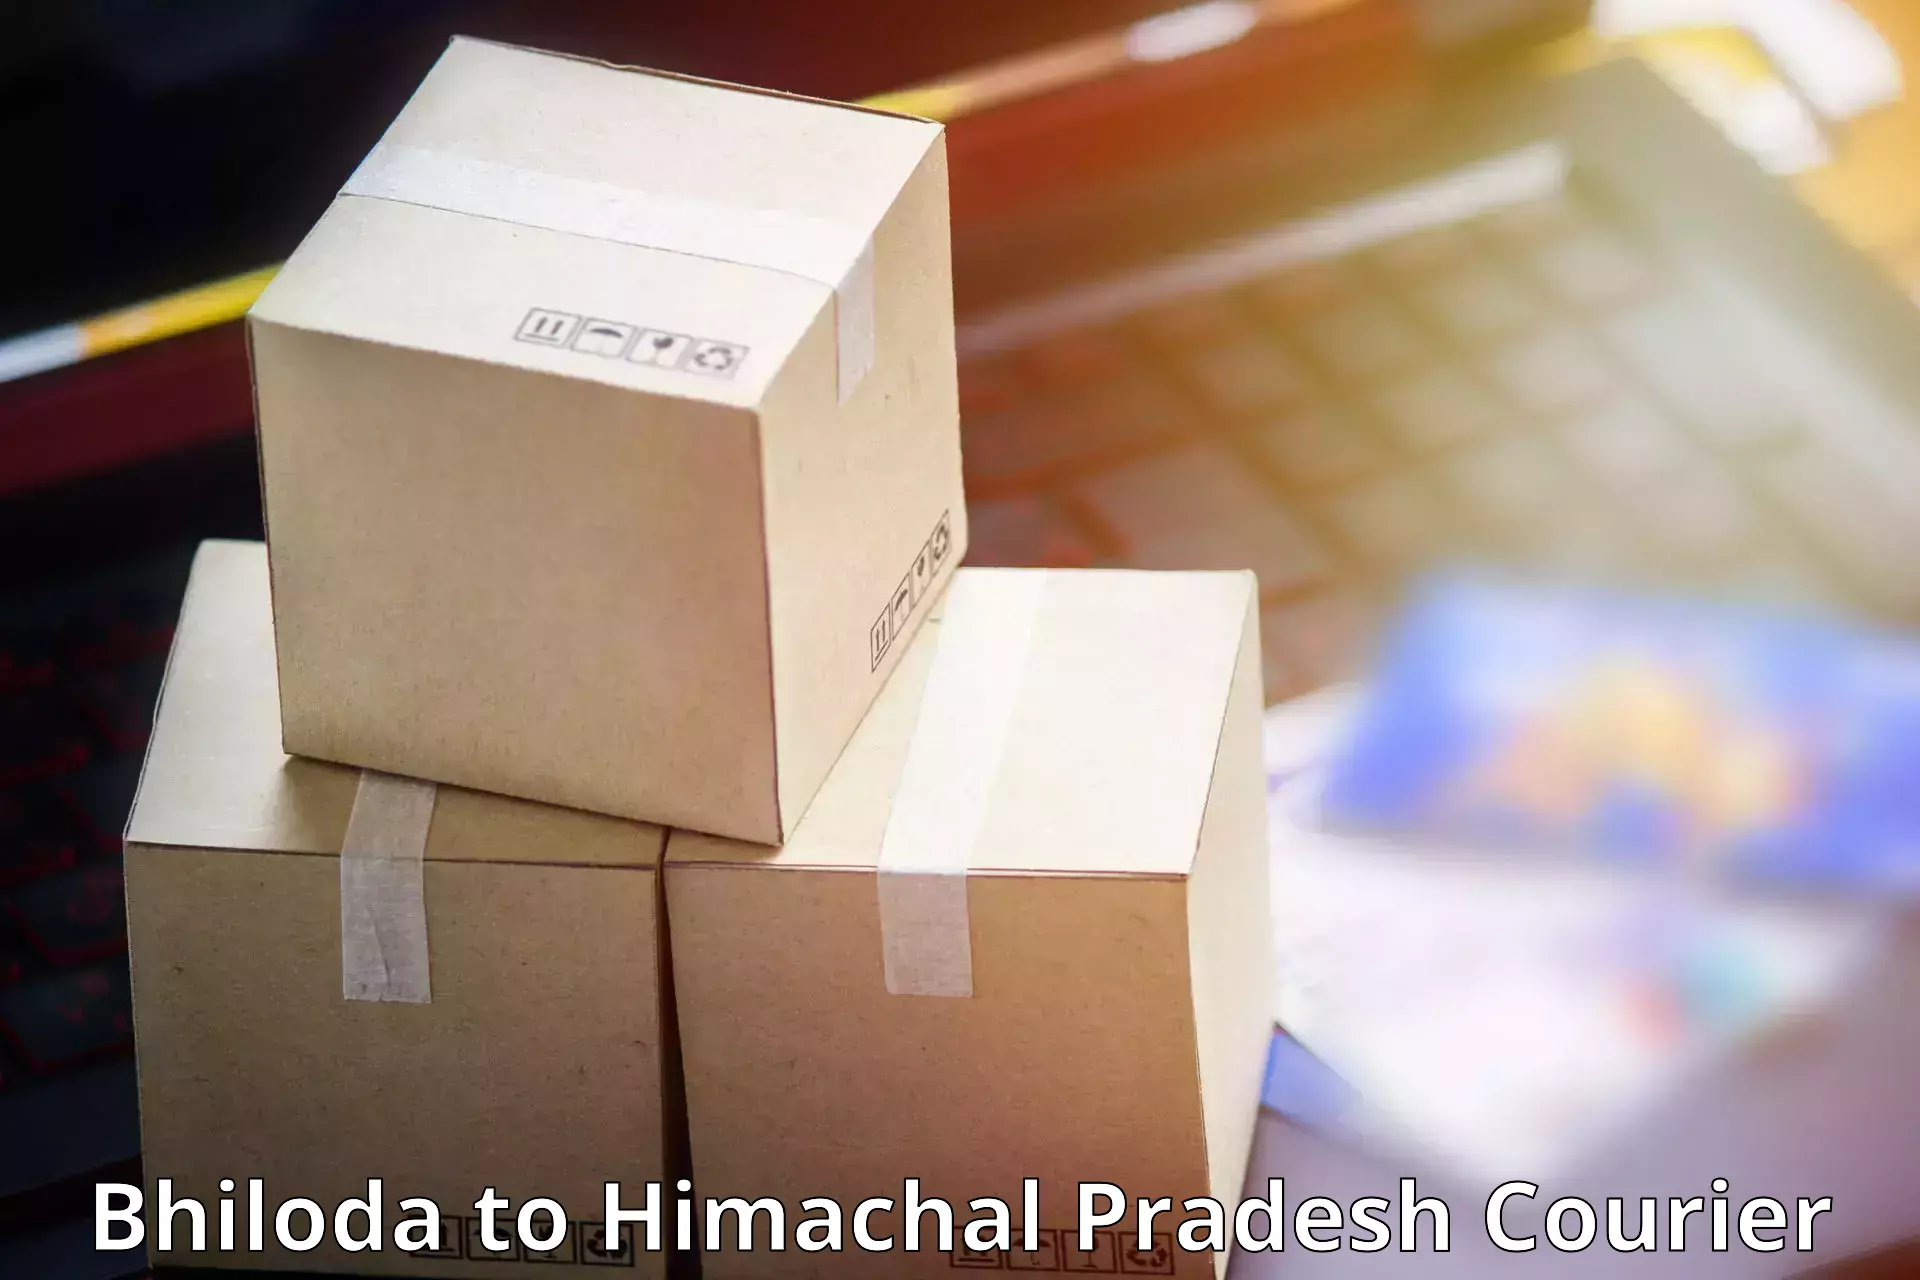 Parcel service for businesses Bhiloda to Nirmand